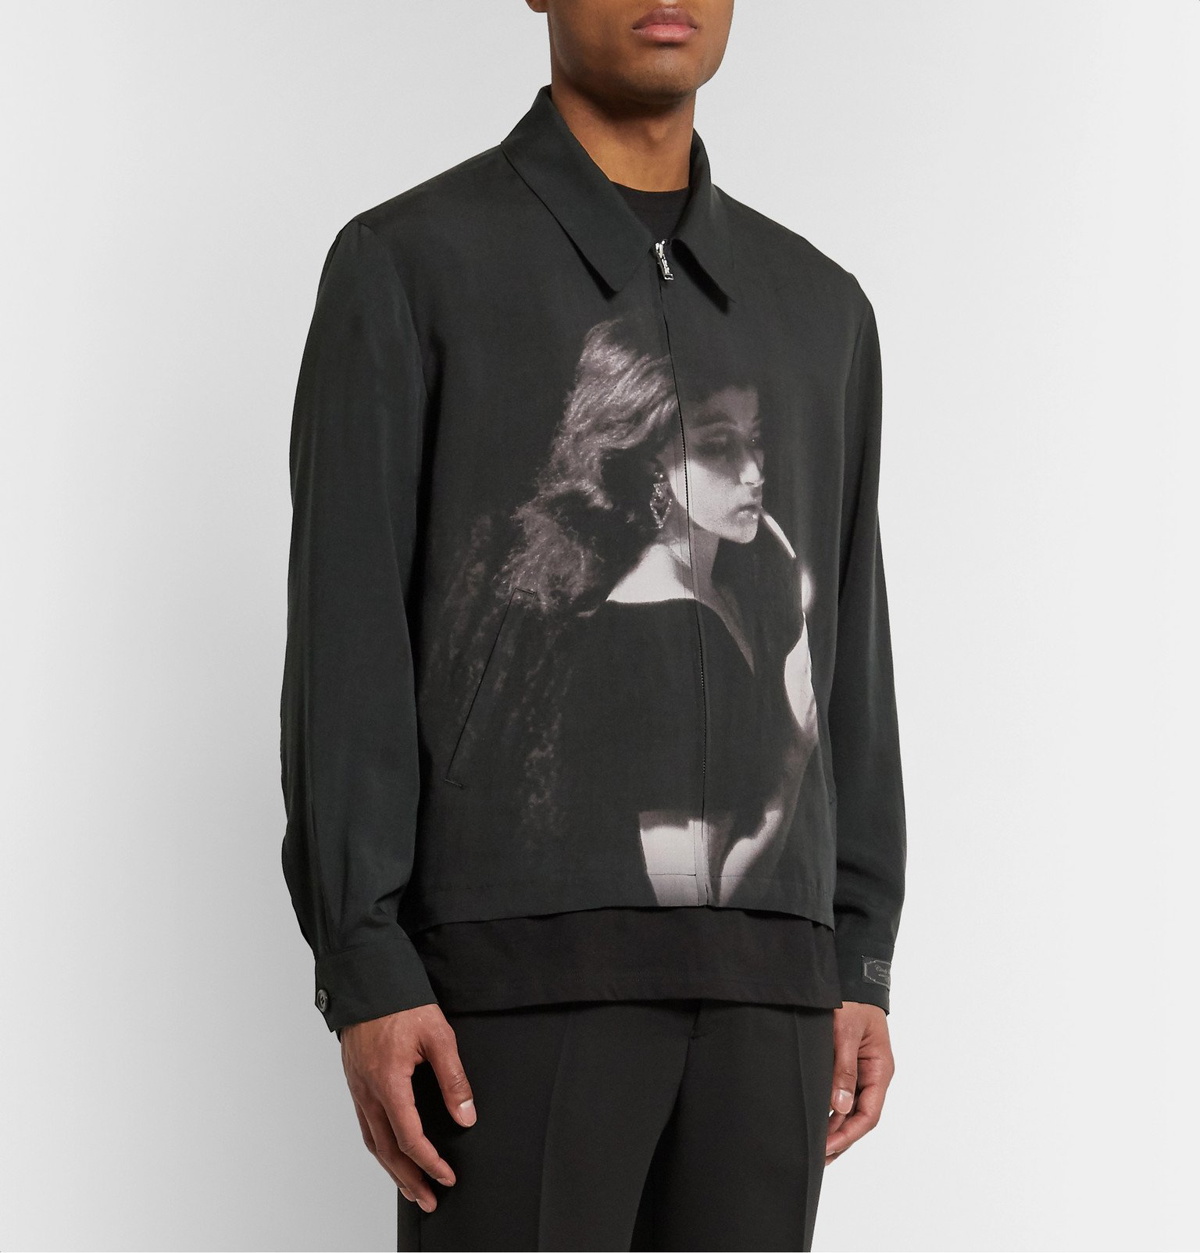 MXLUNDERCOVER cindy sherman printed zip-up